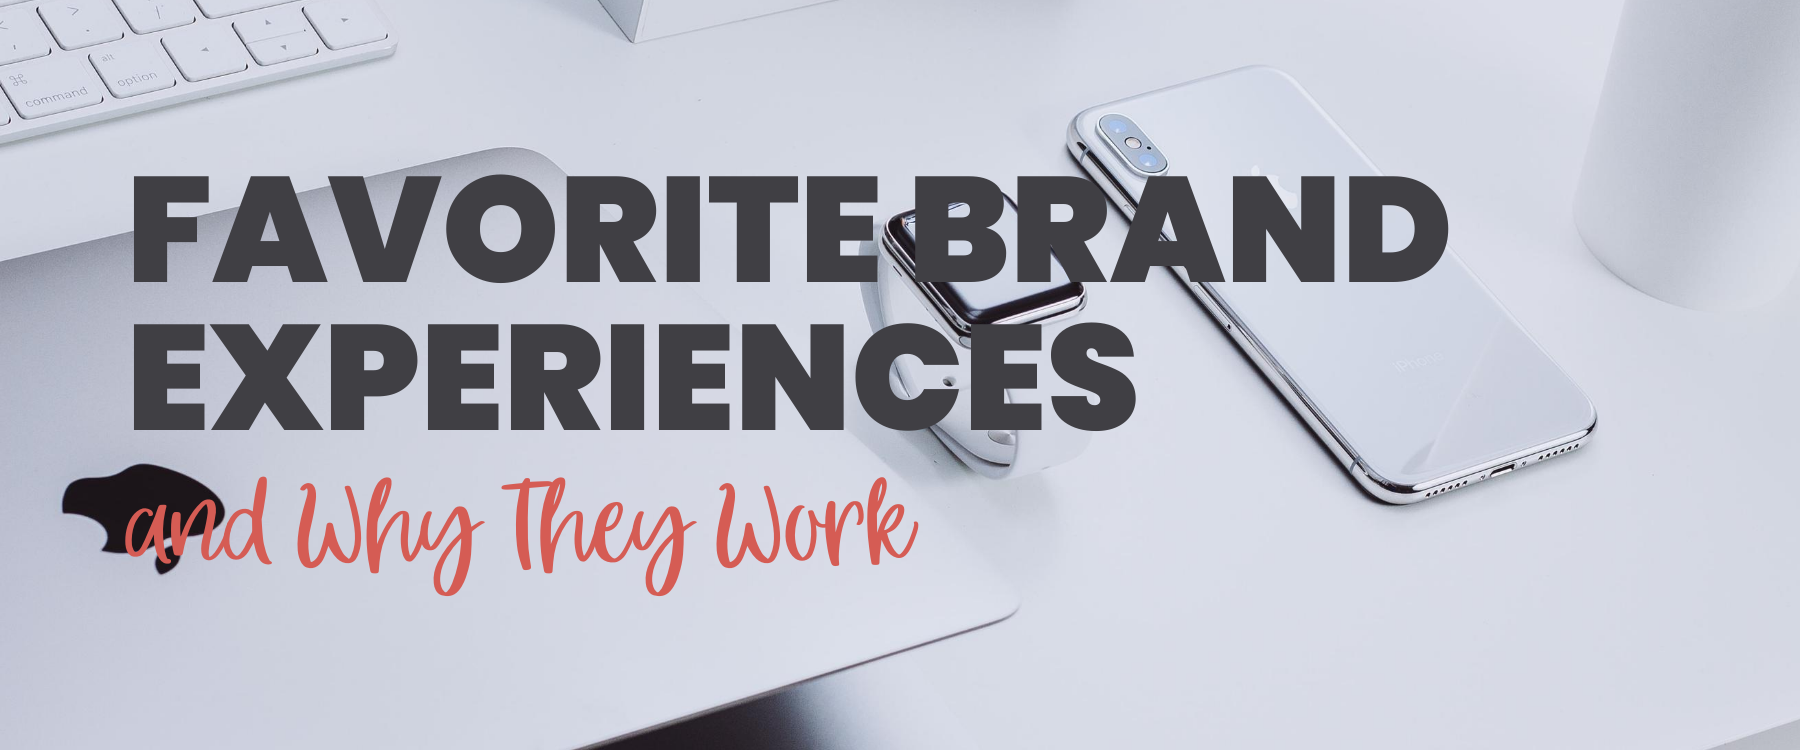 brand experiences that work